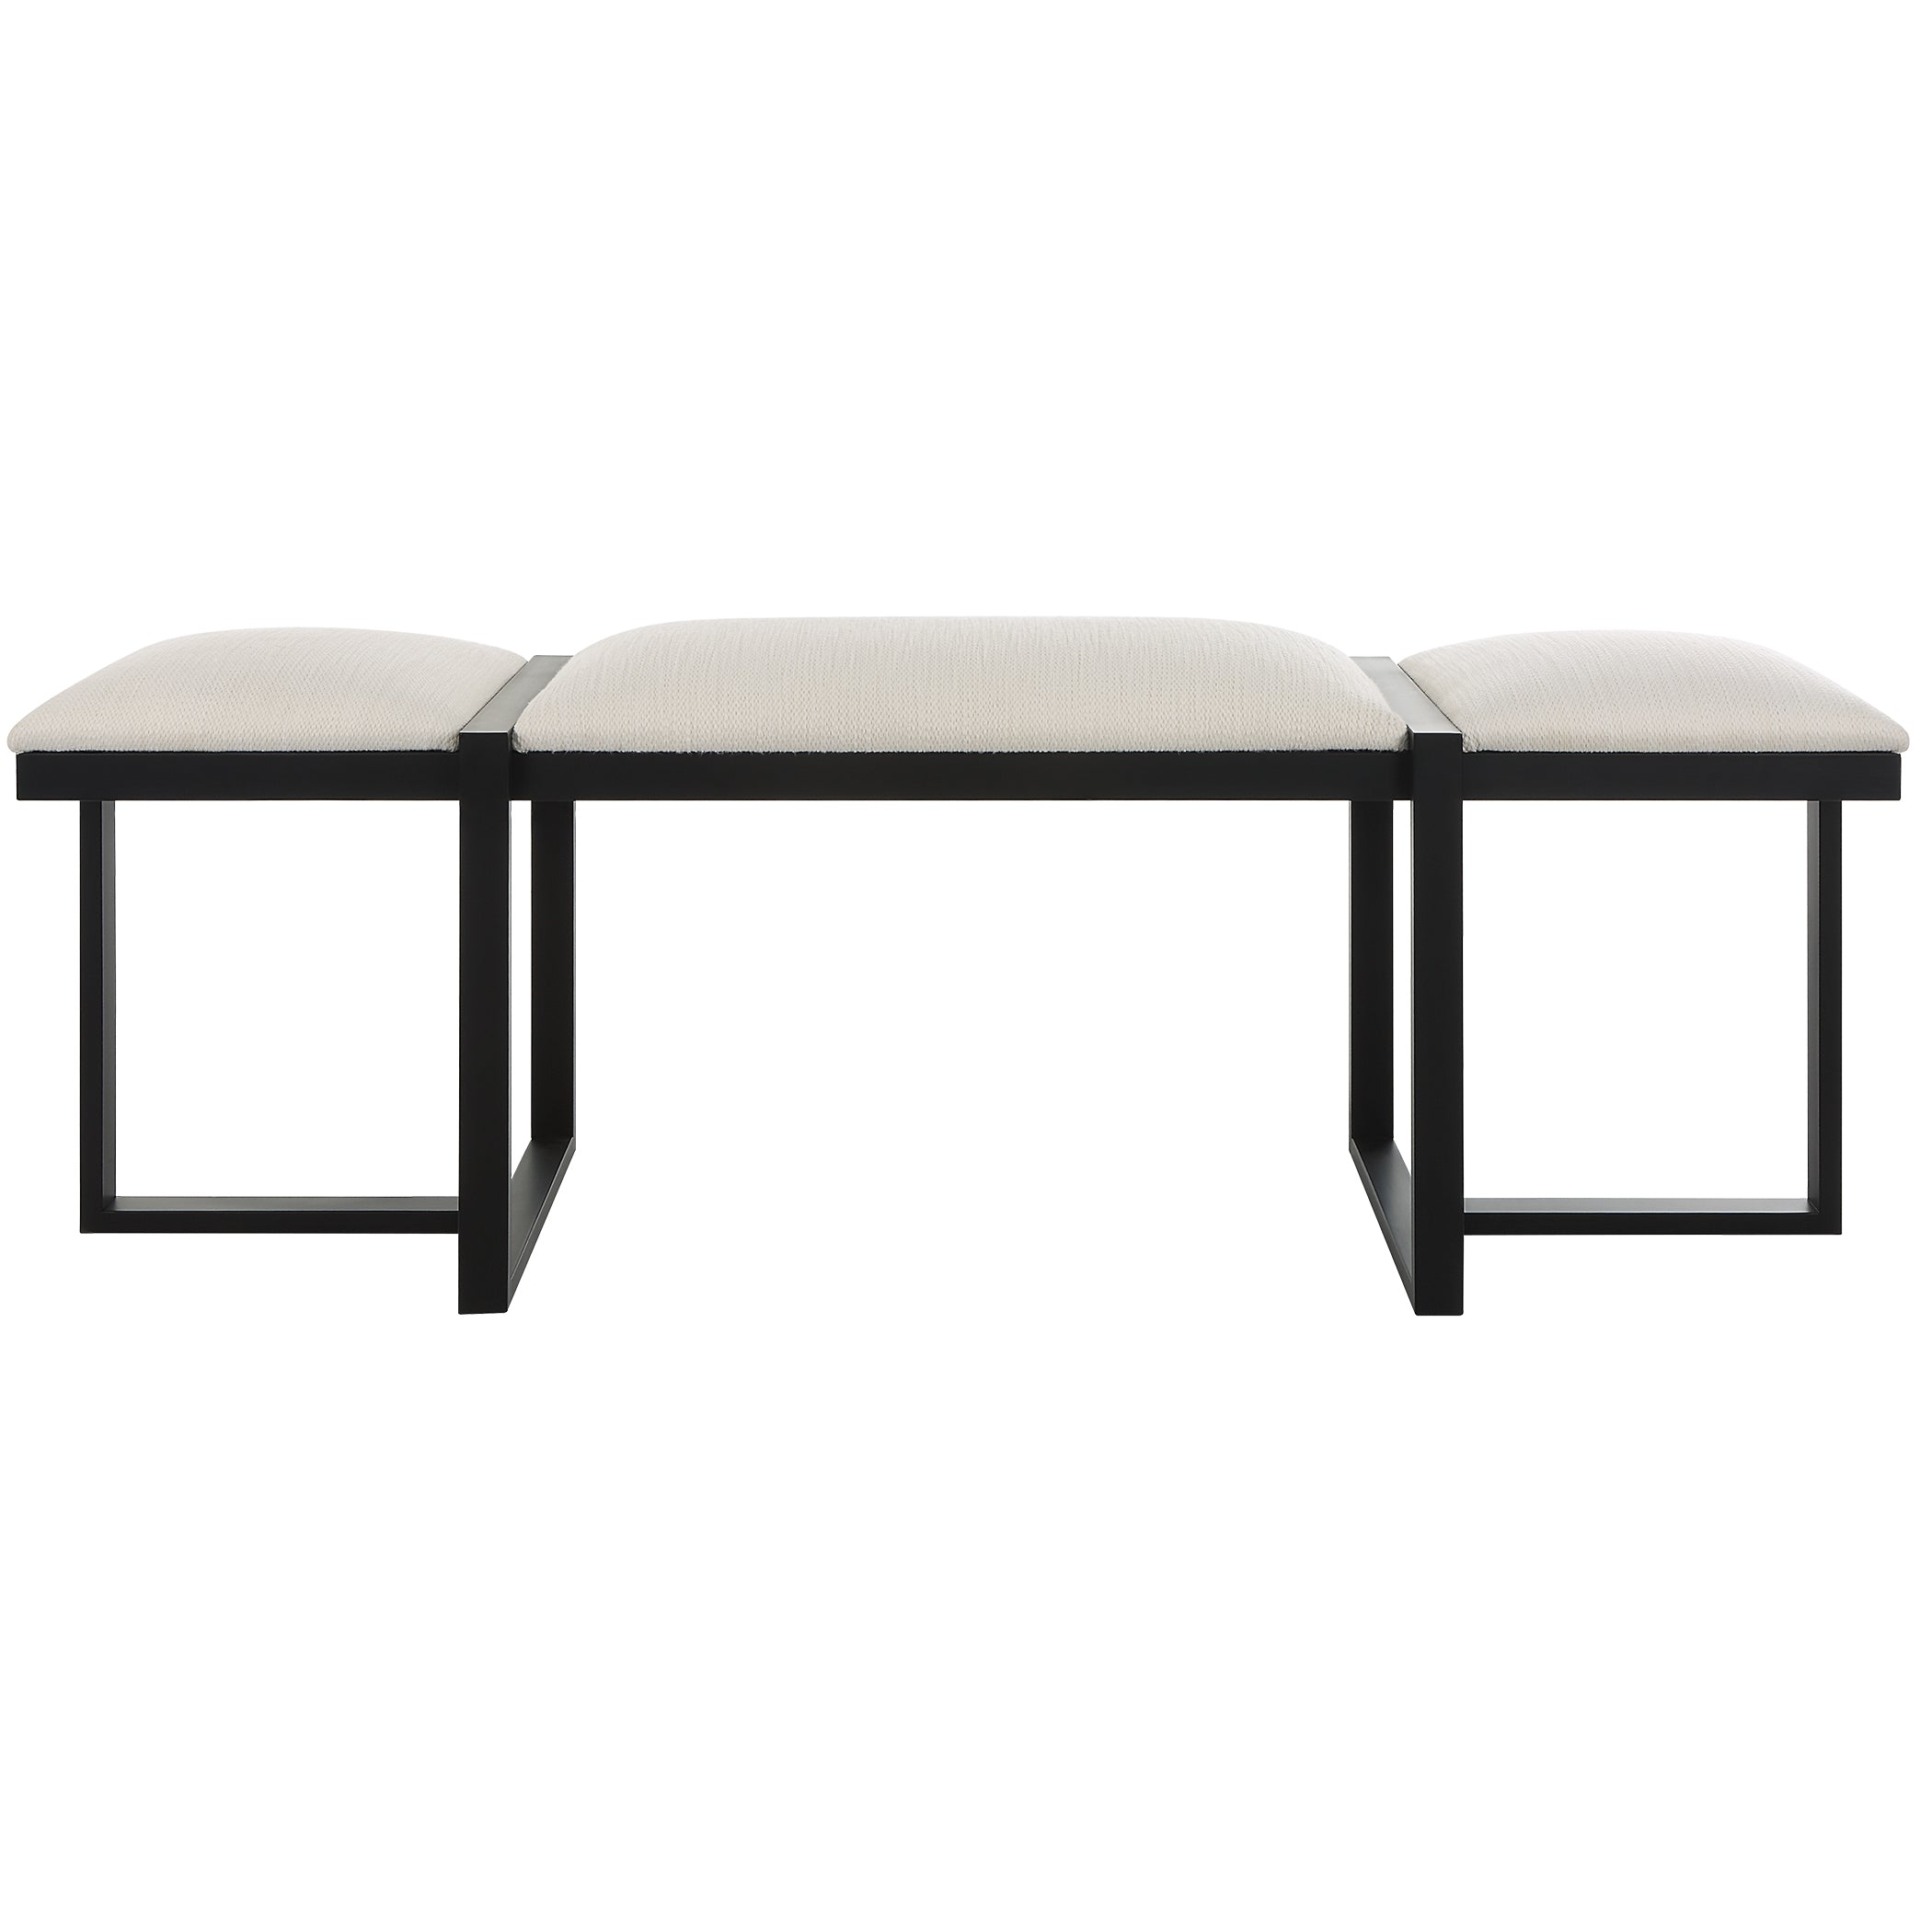 Uttermost Triple Cloud Benches Benches Uttermost   